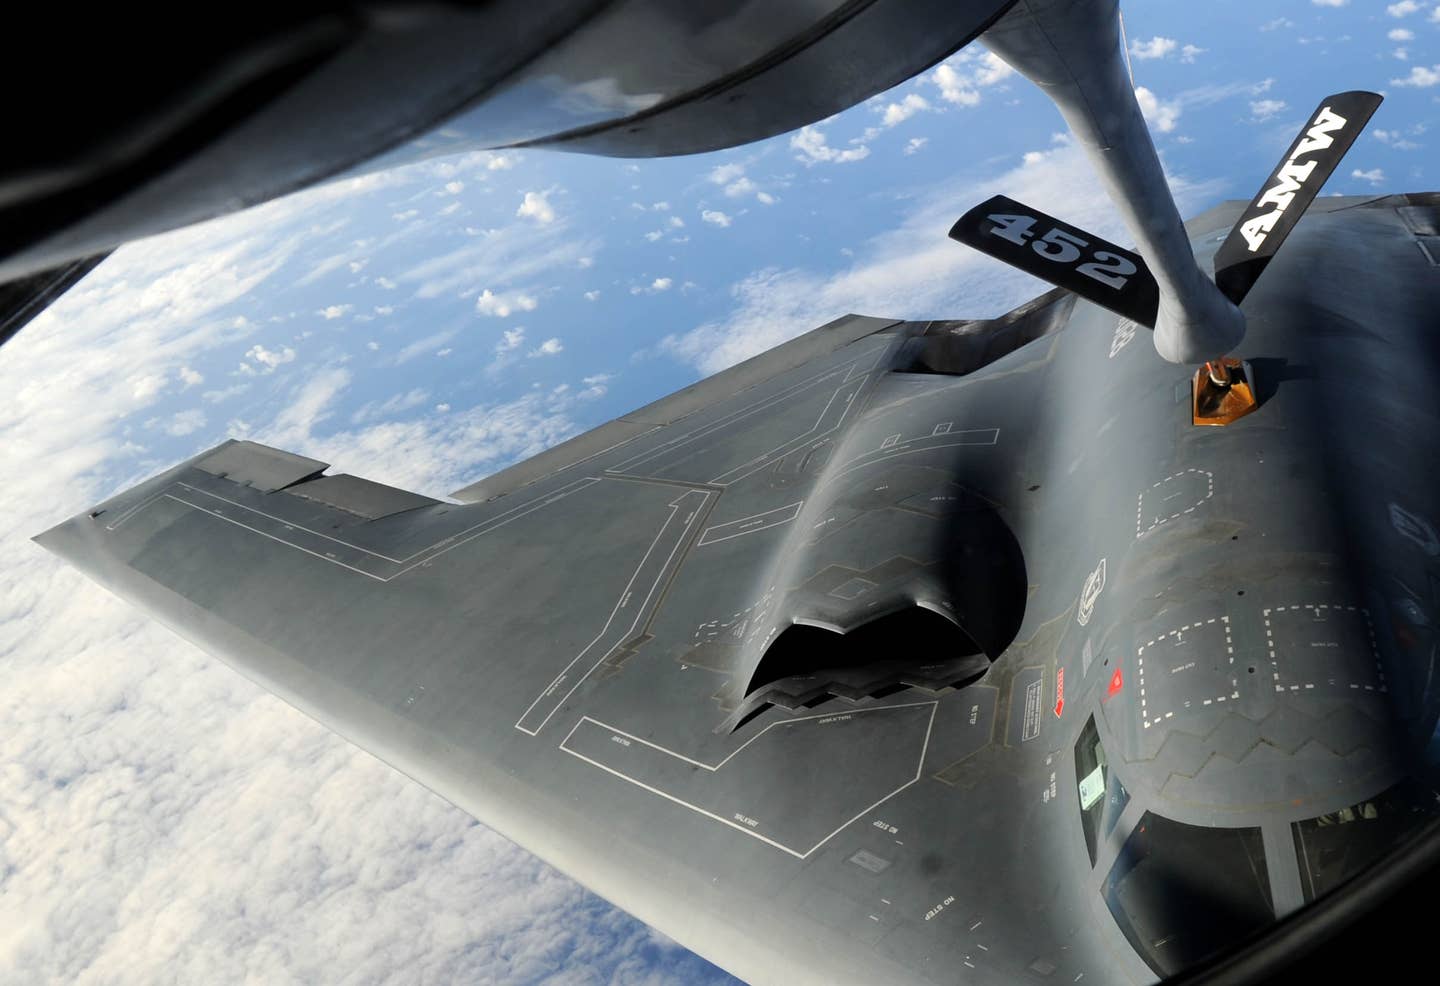 The B-2's far more prominent serrated intakes can be seen here, including the splitter plate between the fuselage and the intake opening that separates turbulent boundary layer air from the stable air entering the intake. (U.S. Air Force photo by Senior Airman Christopher Bush/Released)